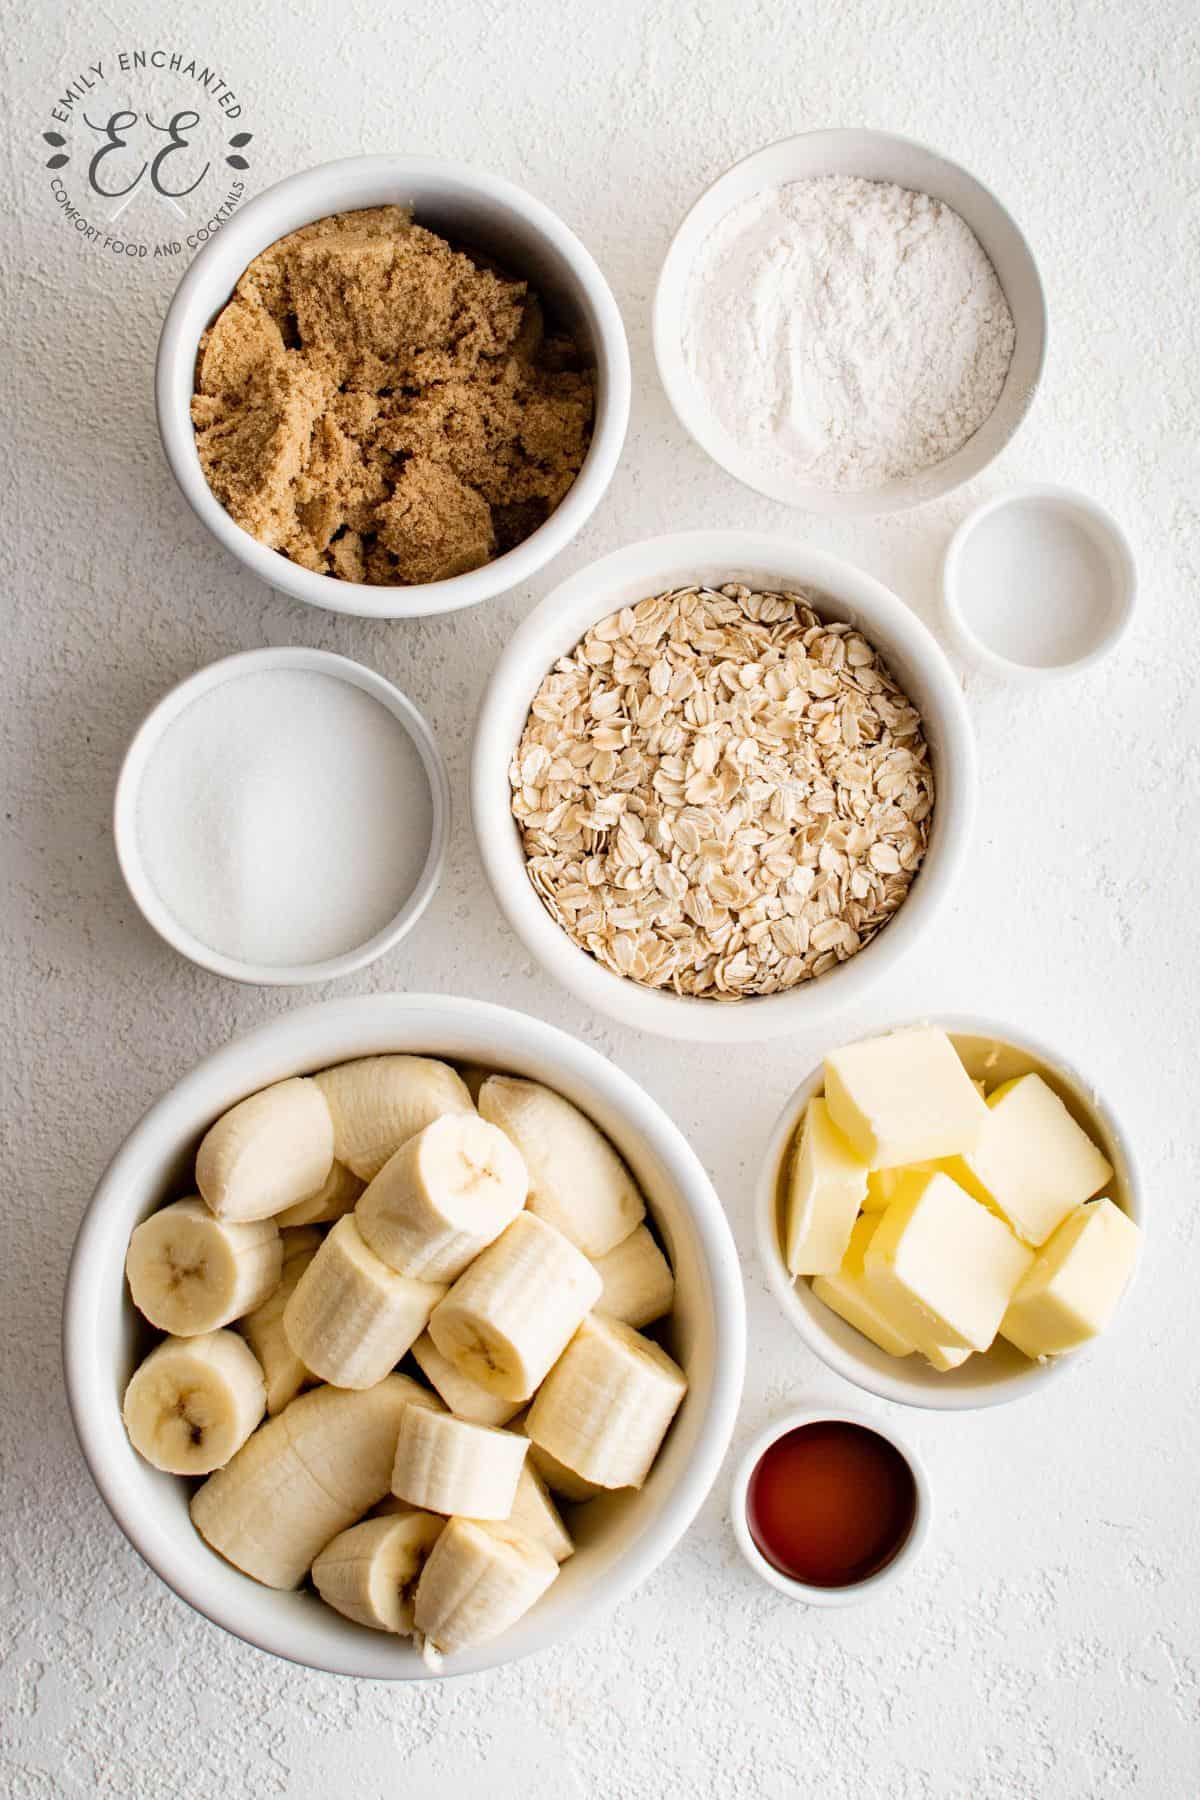 Banana Crumble Ingredients in a flat lay